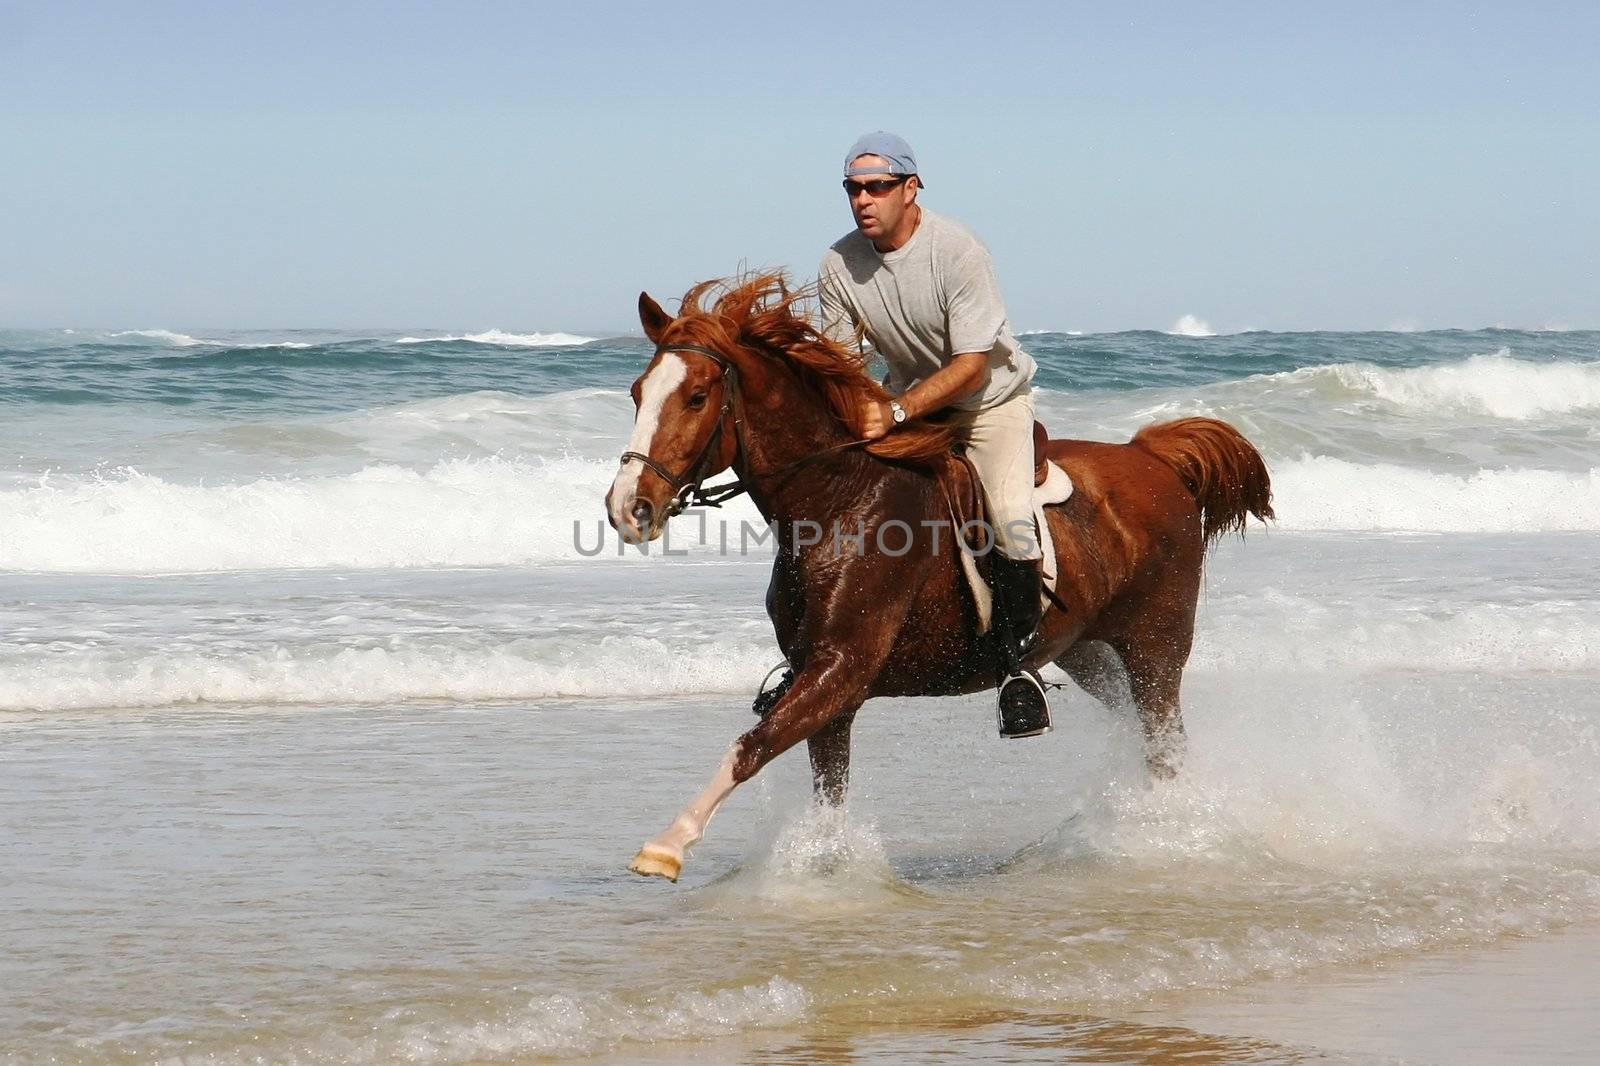 Galloping brown horse and rider in the shallow water at the beach